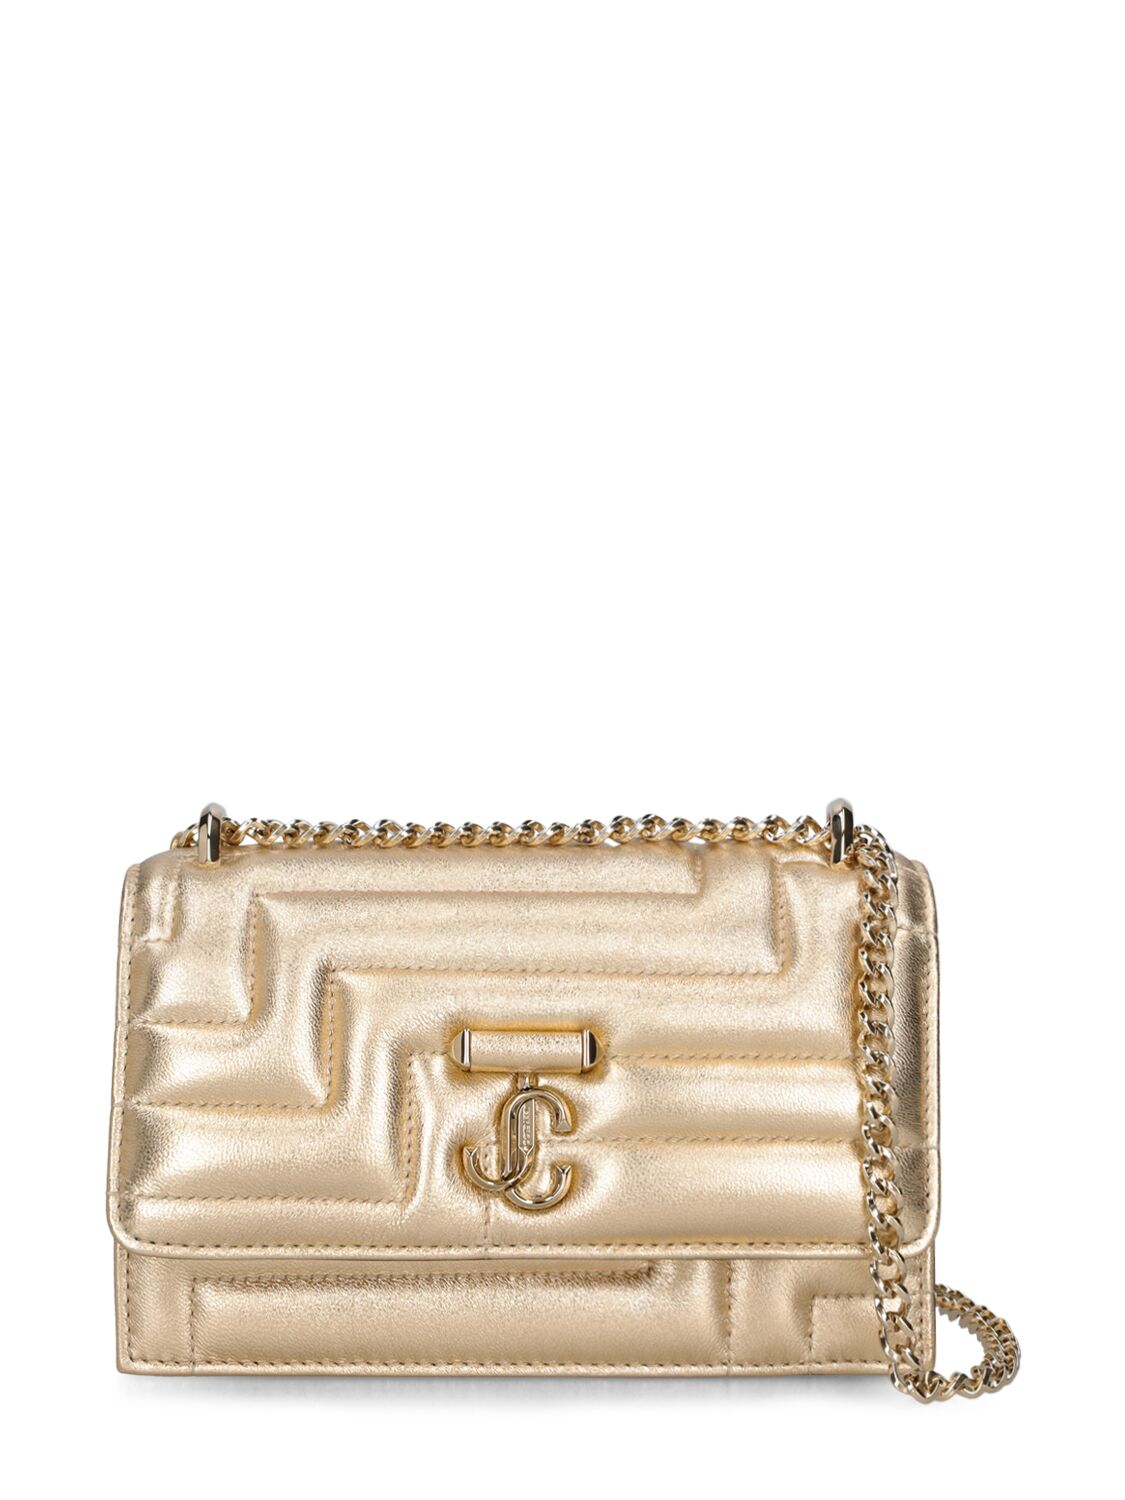 Jimmy Choo Bohemia Quilted Metallic Shoulder Bag In Gold